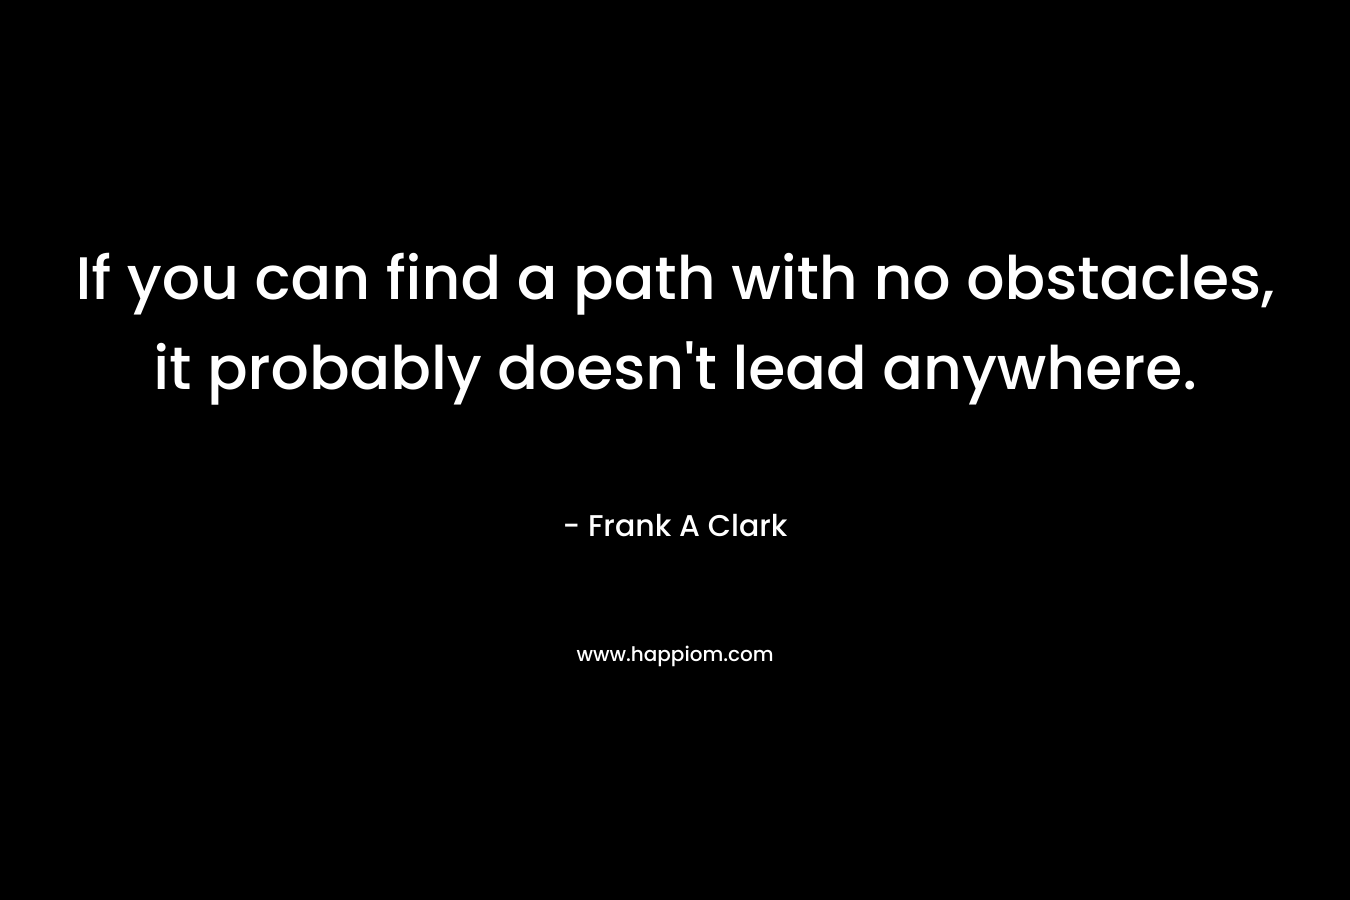 If you can find a path with no obstacles, it probably doesn't lead anywhere.